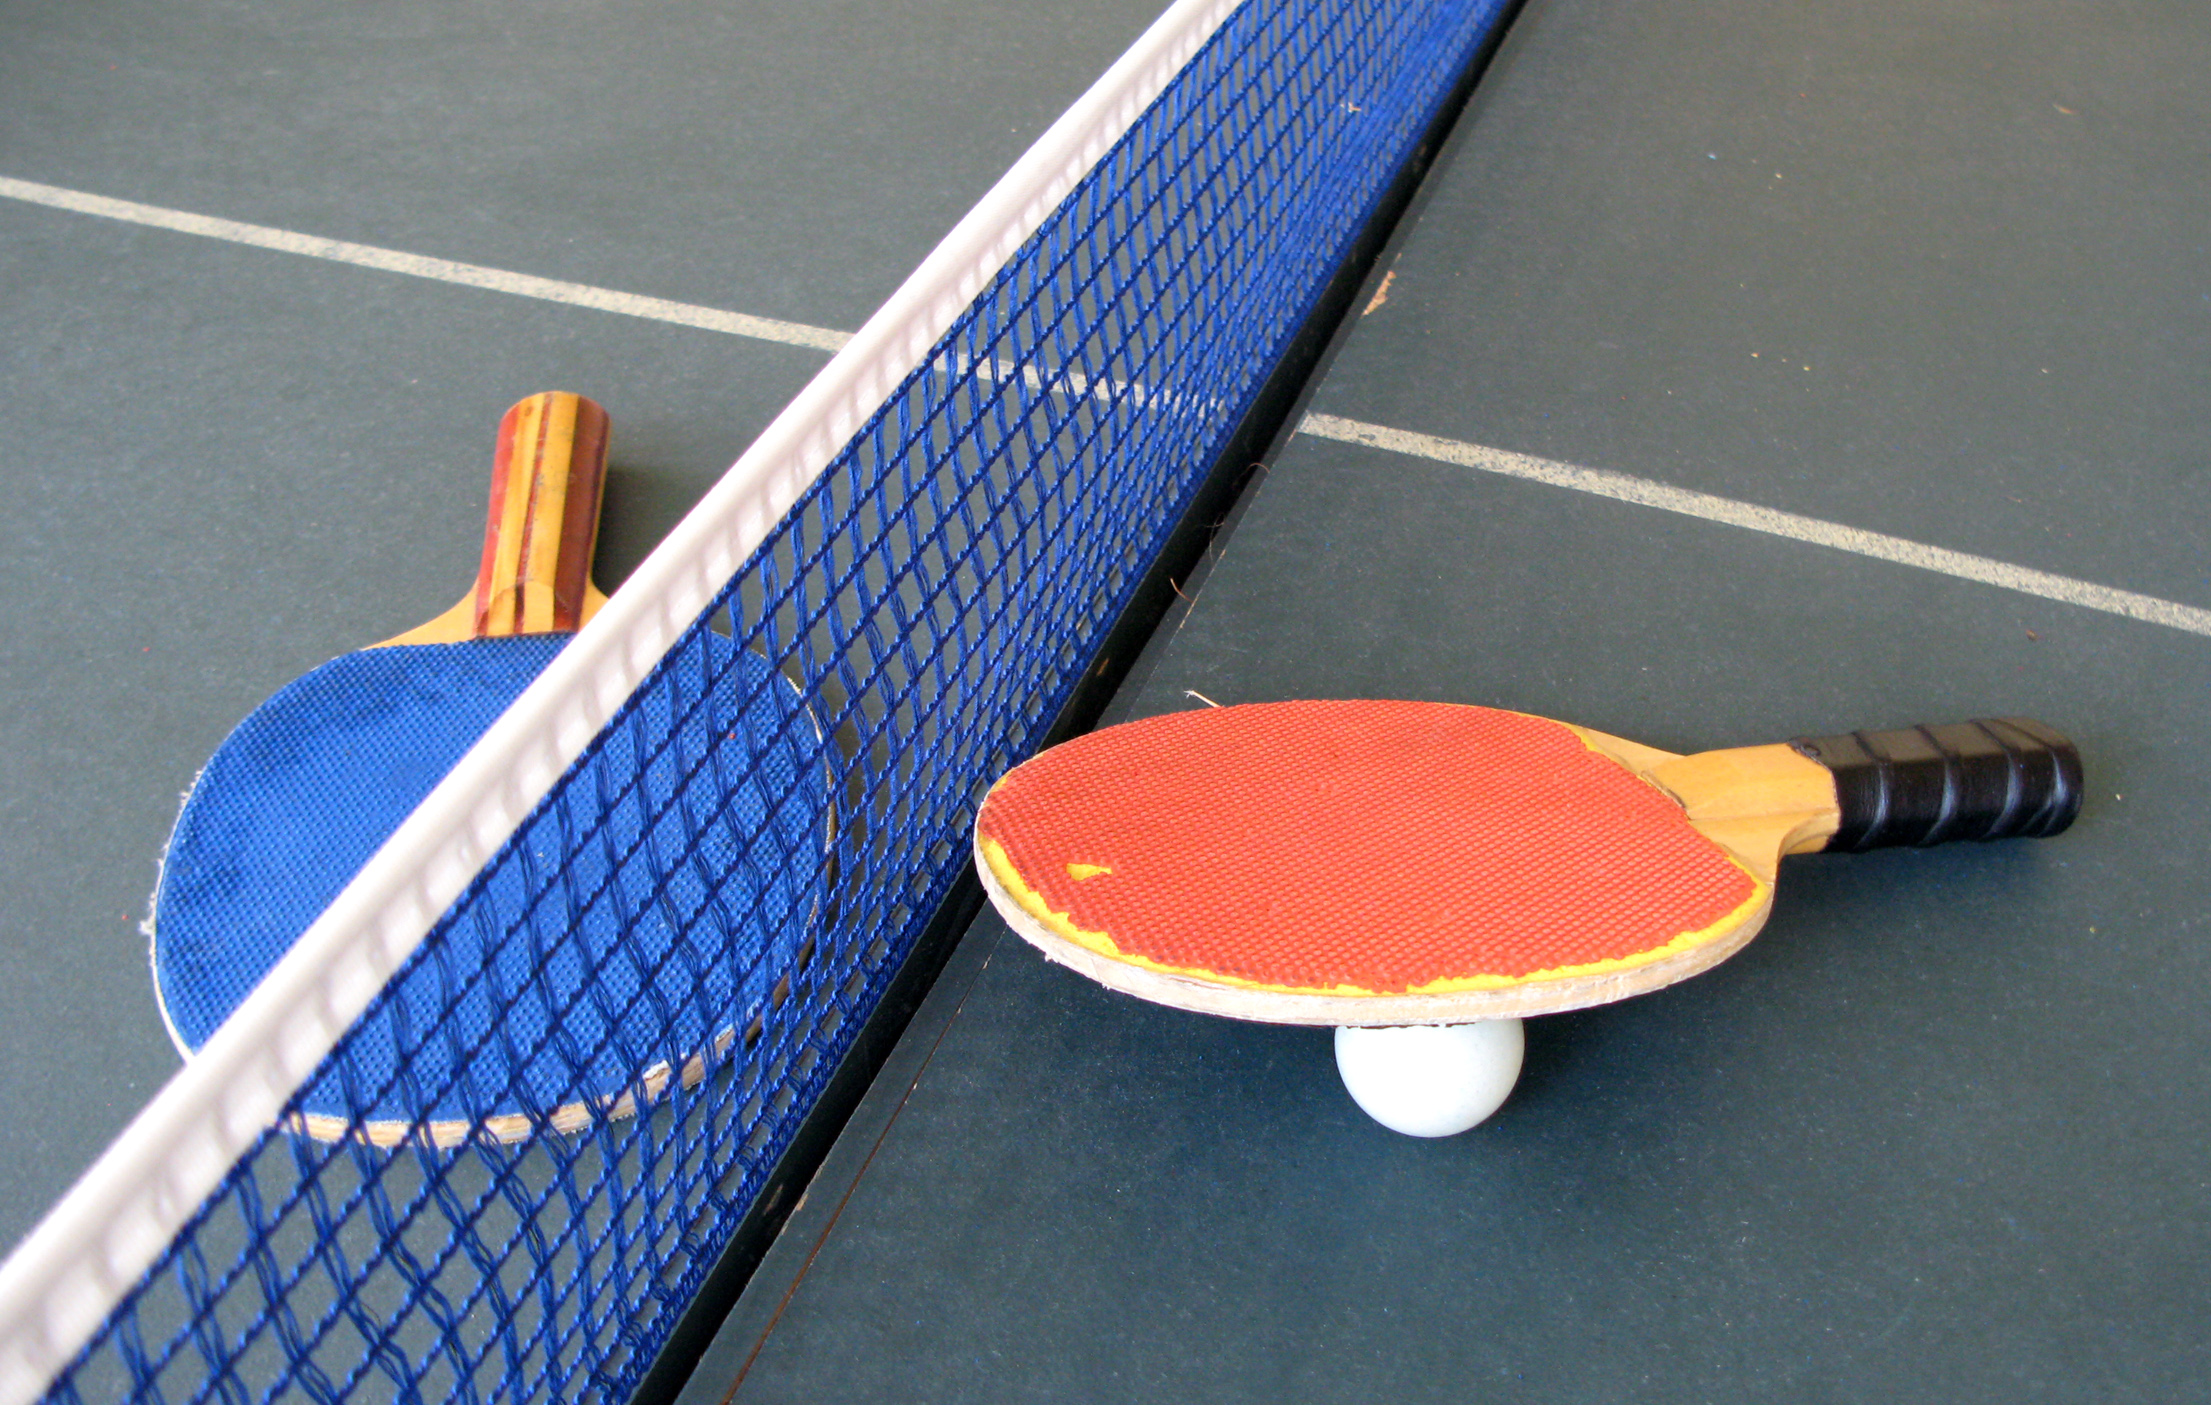 Table Tennis - Table Tennis Tools And Equipment , HD Wallpaper & Backgrounds